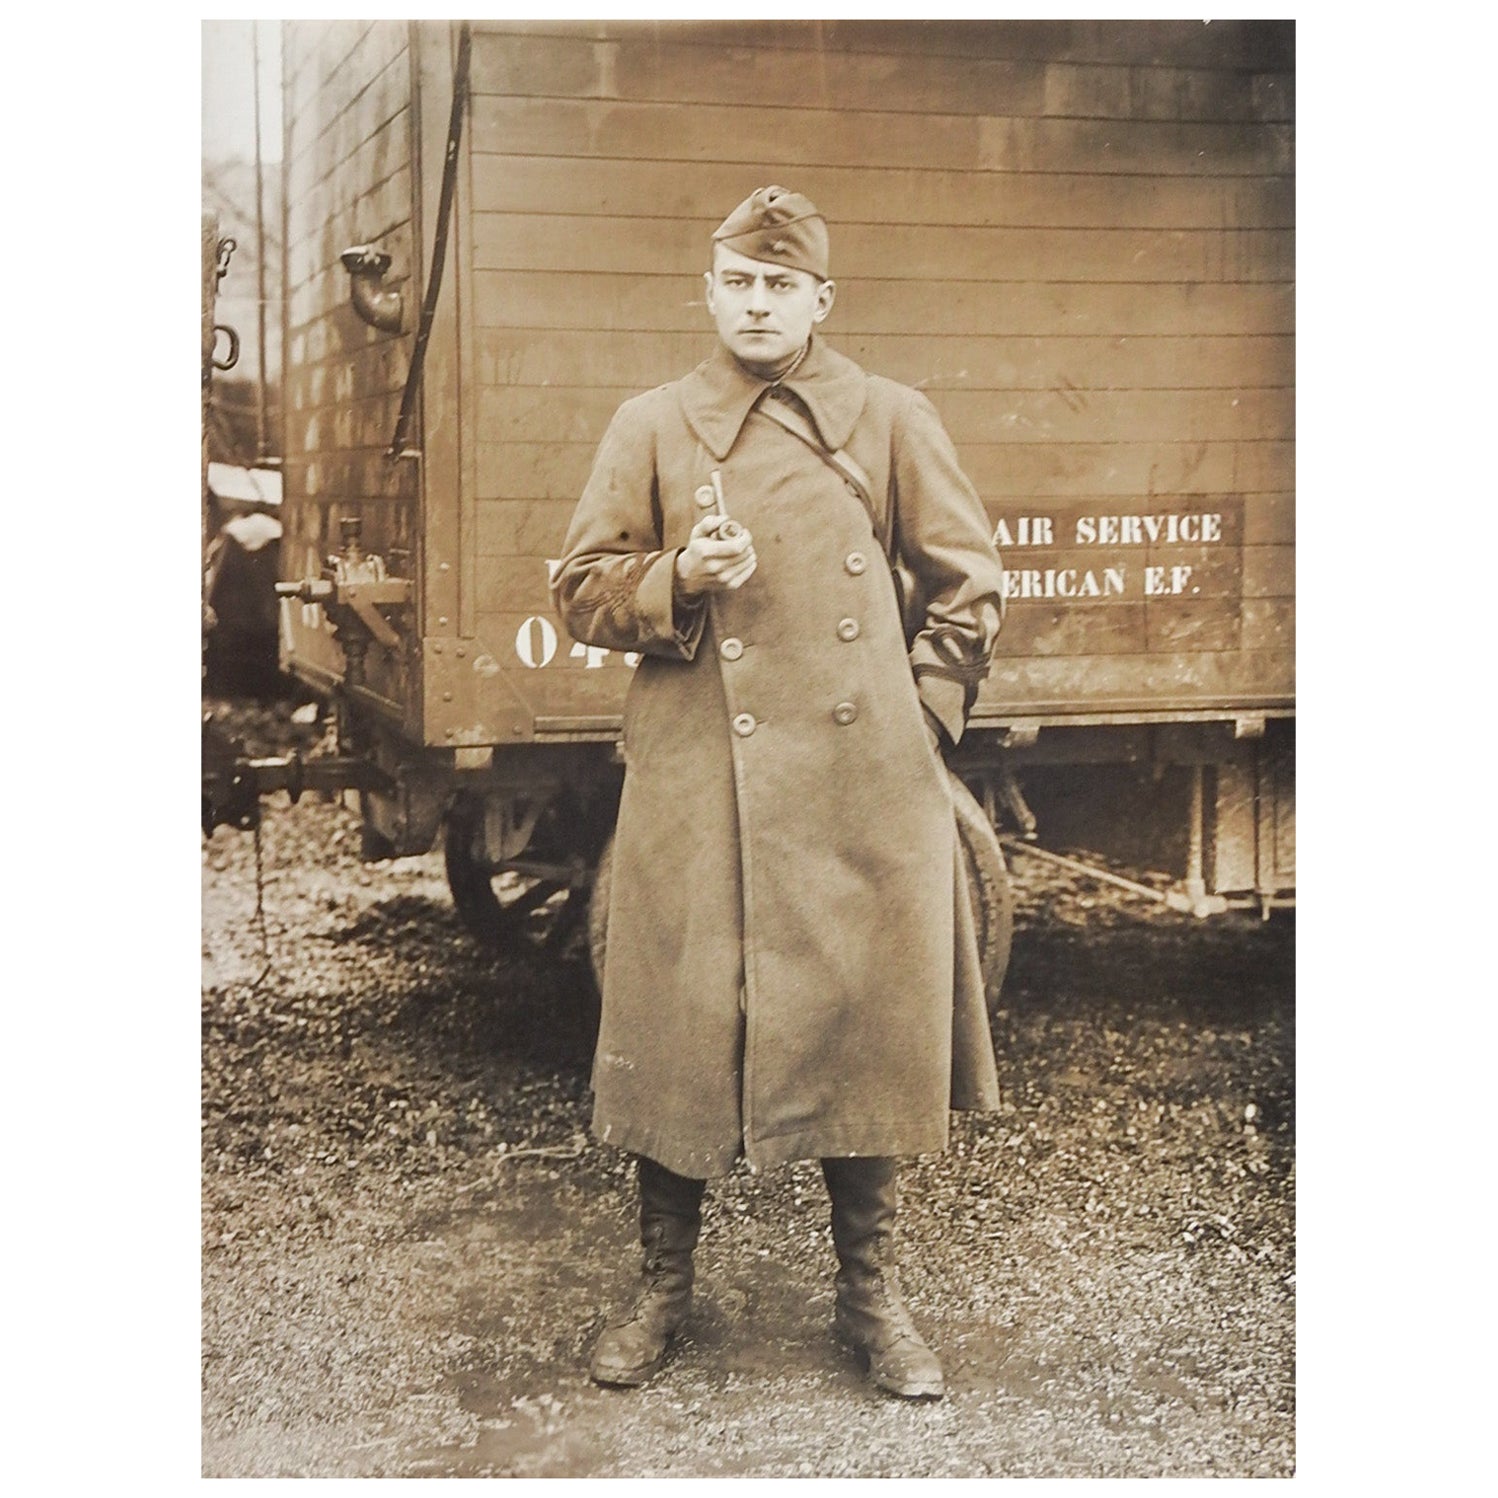 1918, Serviceman American Expeditionary Force Photograph Air Service For Sale